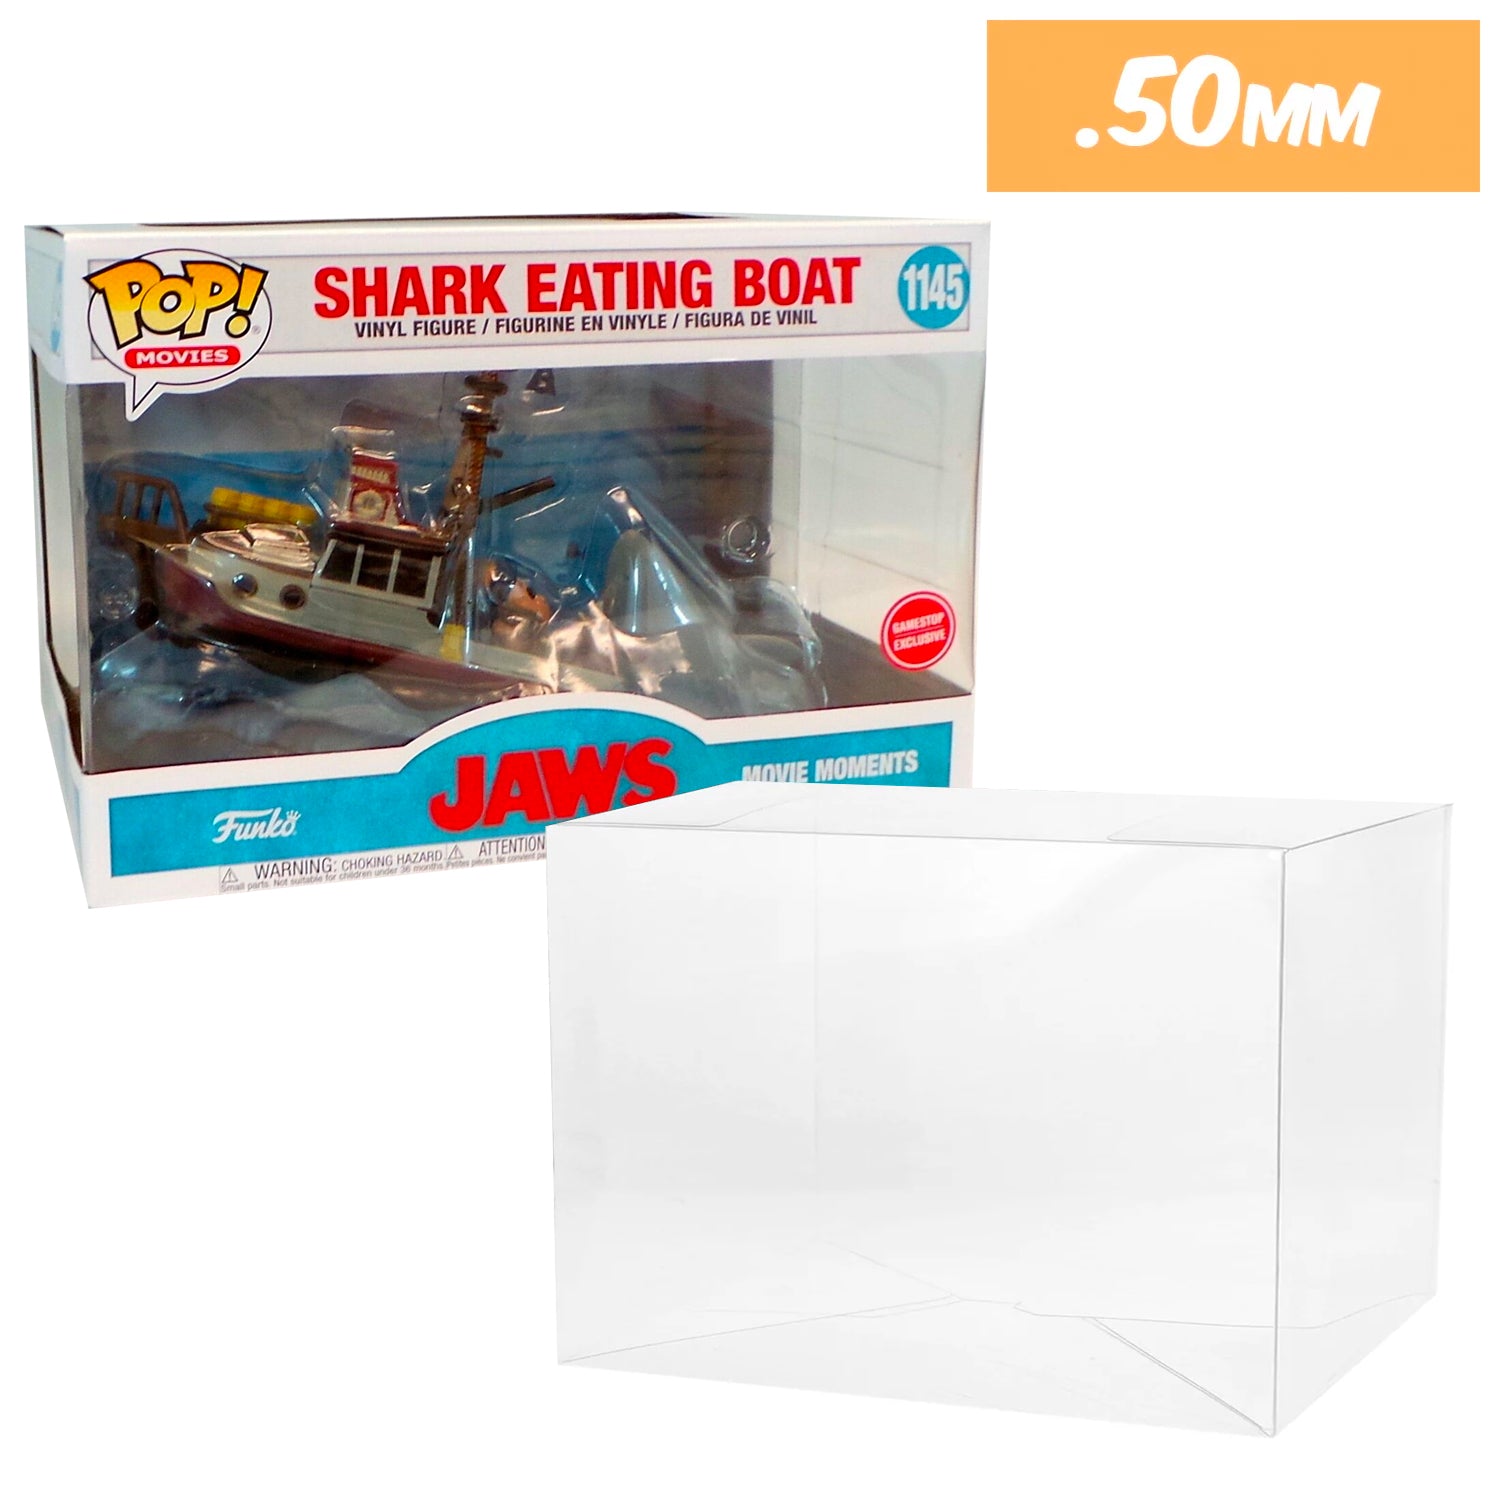 JAWS GS BOAT Pop Protectors for Funko (50mm thick) 7.25h x 10.75